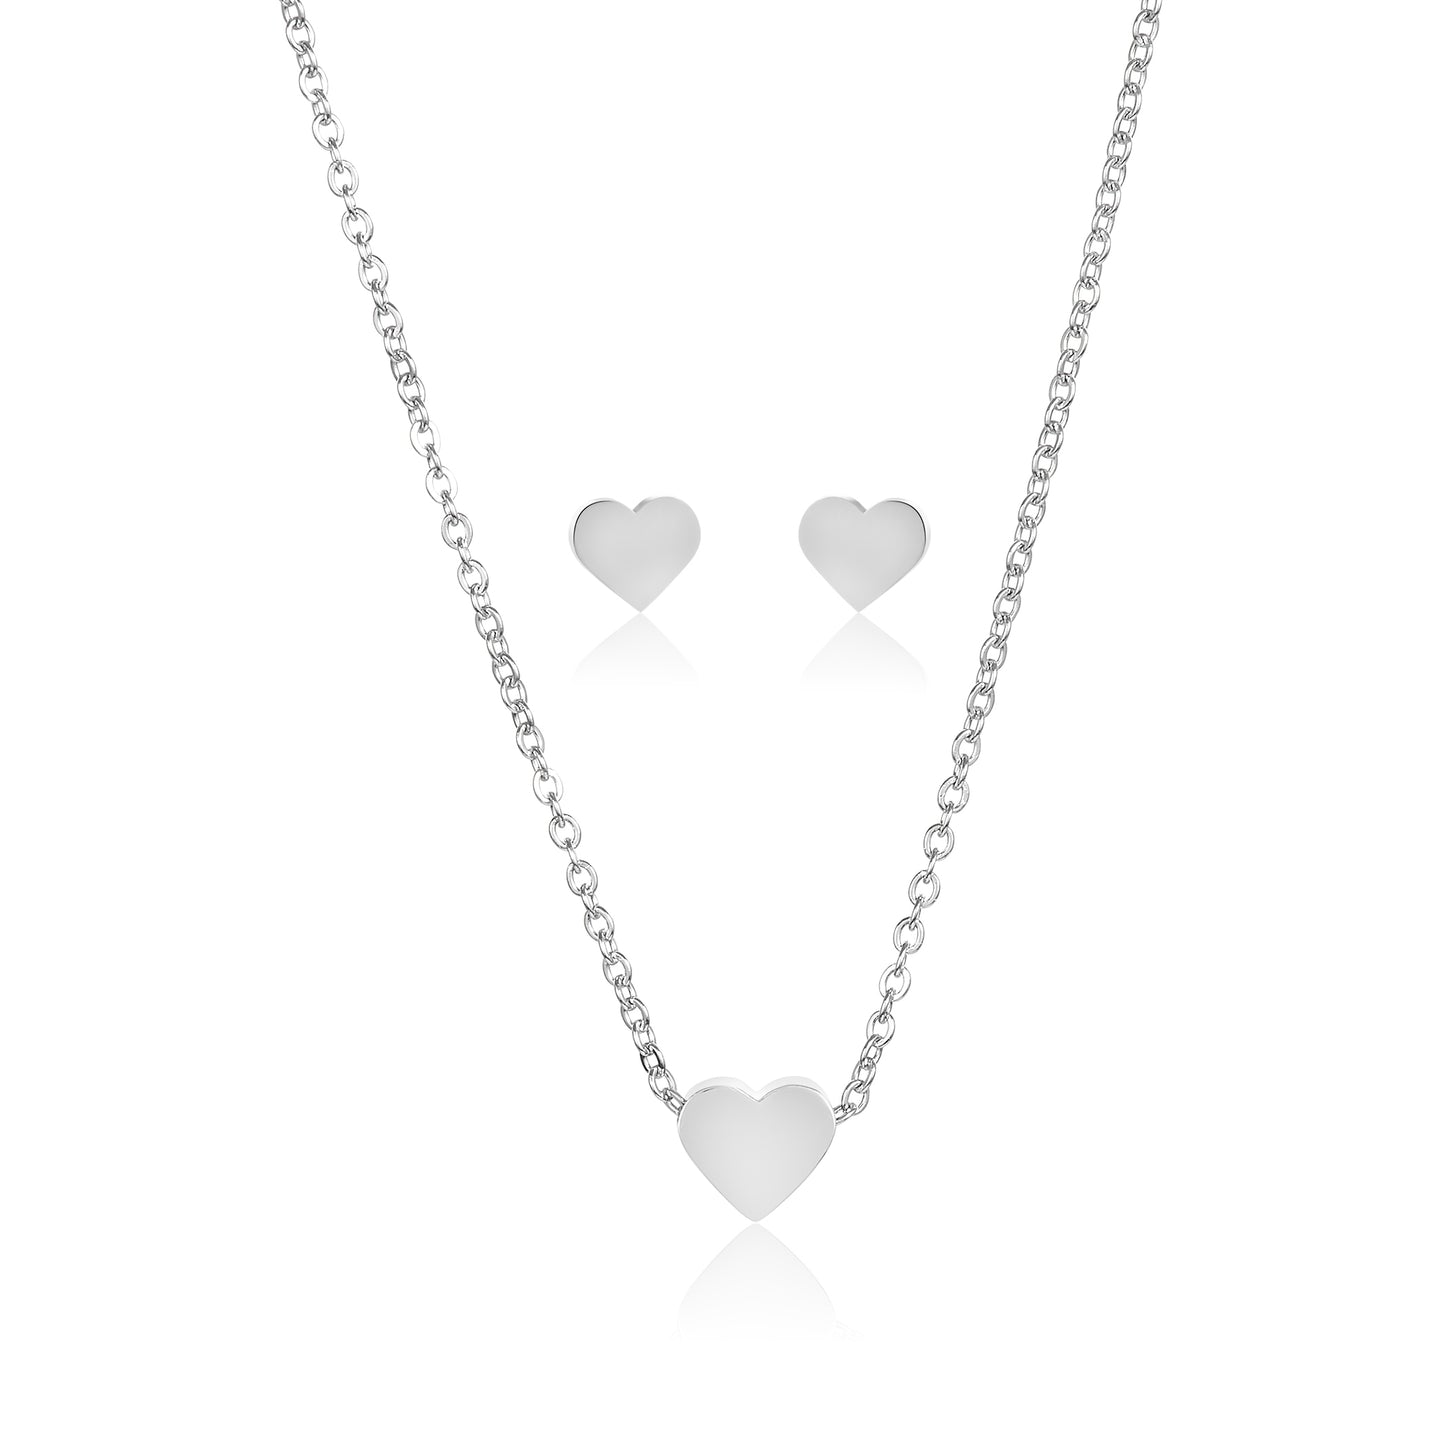 ELYA Heart Shaped Necklace and Earrings Jewelry Set